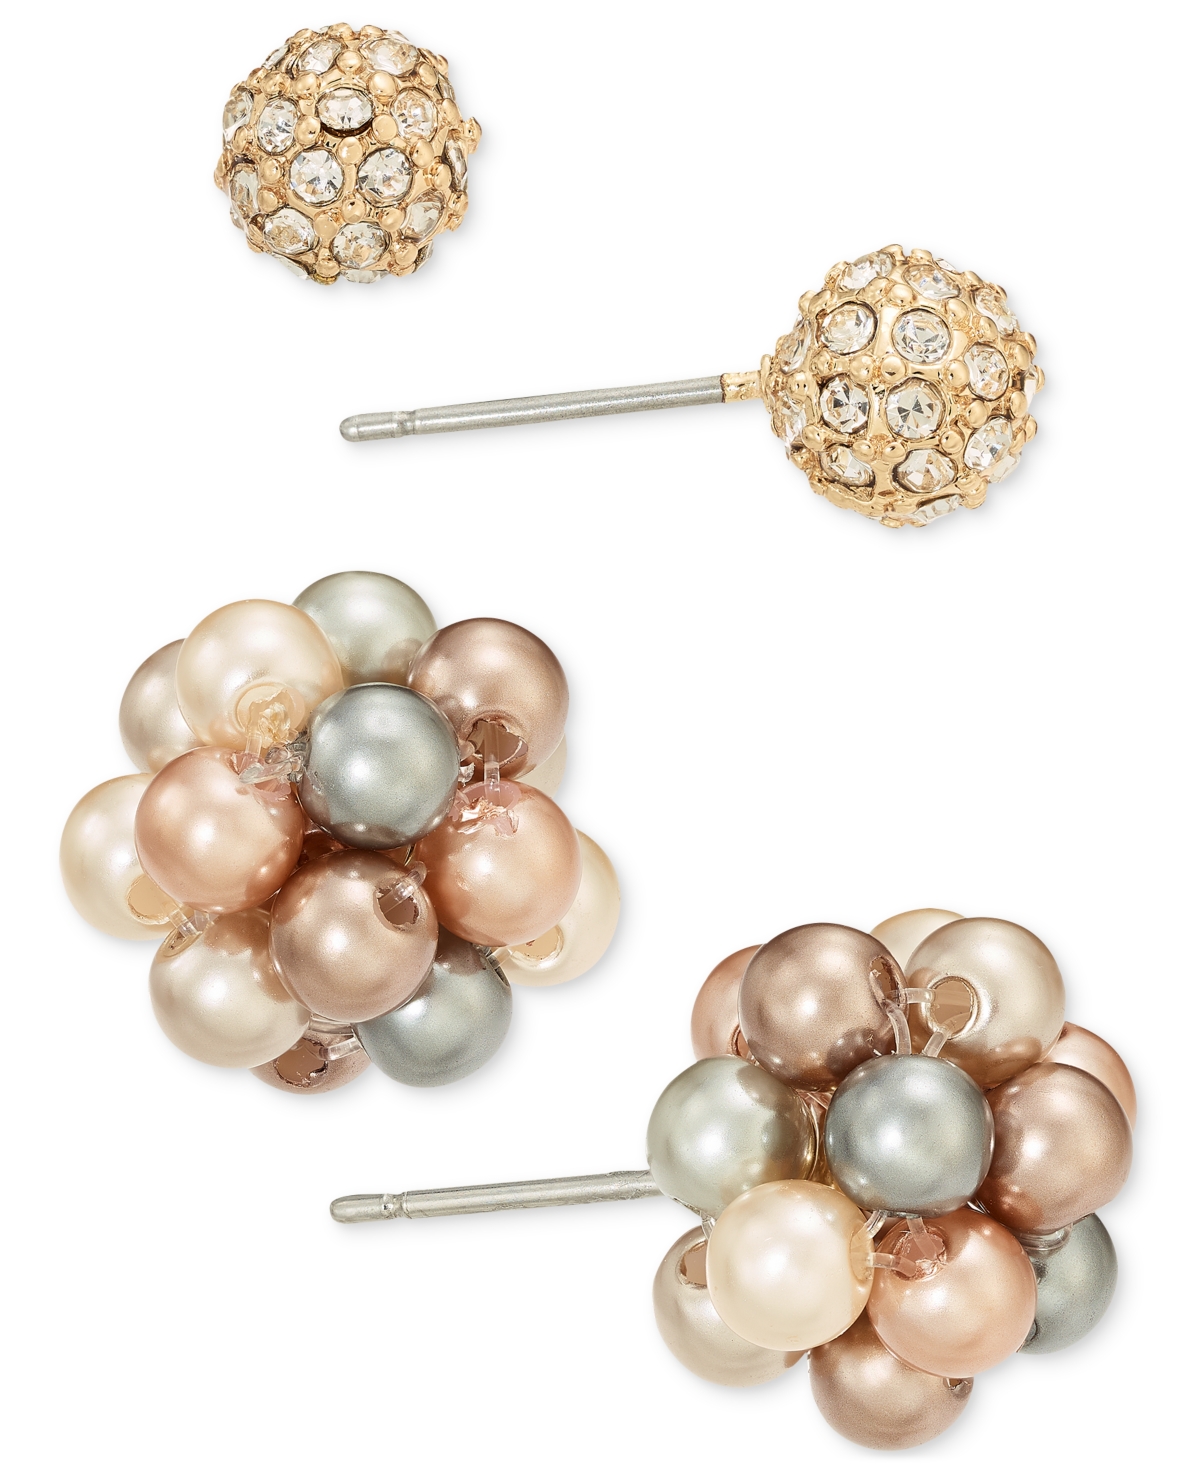 Gold-Tone 2-Pc. Set Pave Fireball & Tonal Imitation Pearl Cluster Stud Earrings, Created for Macy's - Taupe